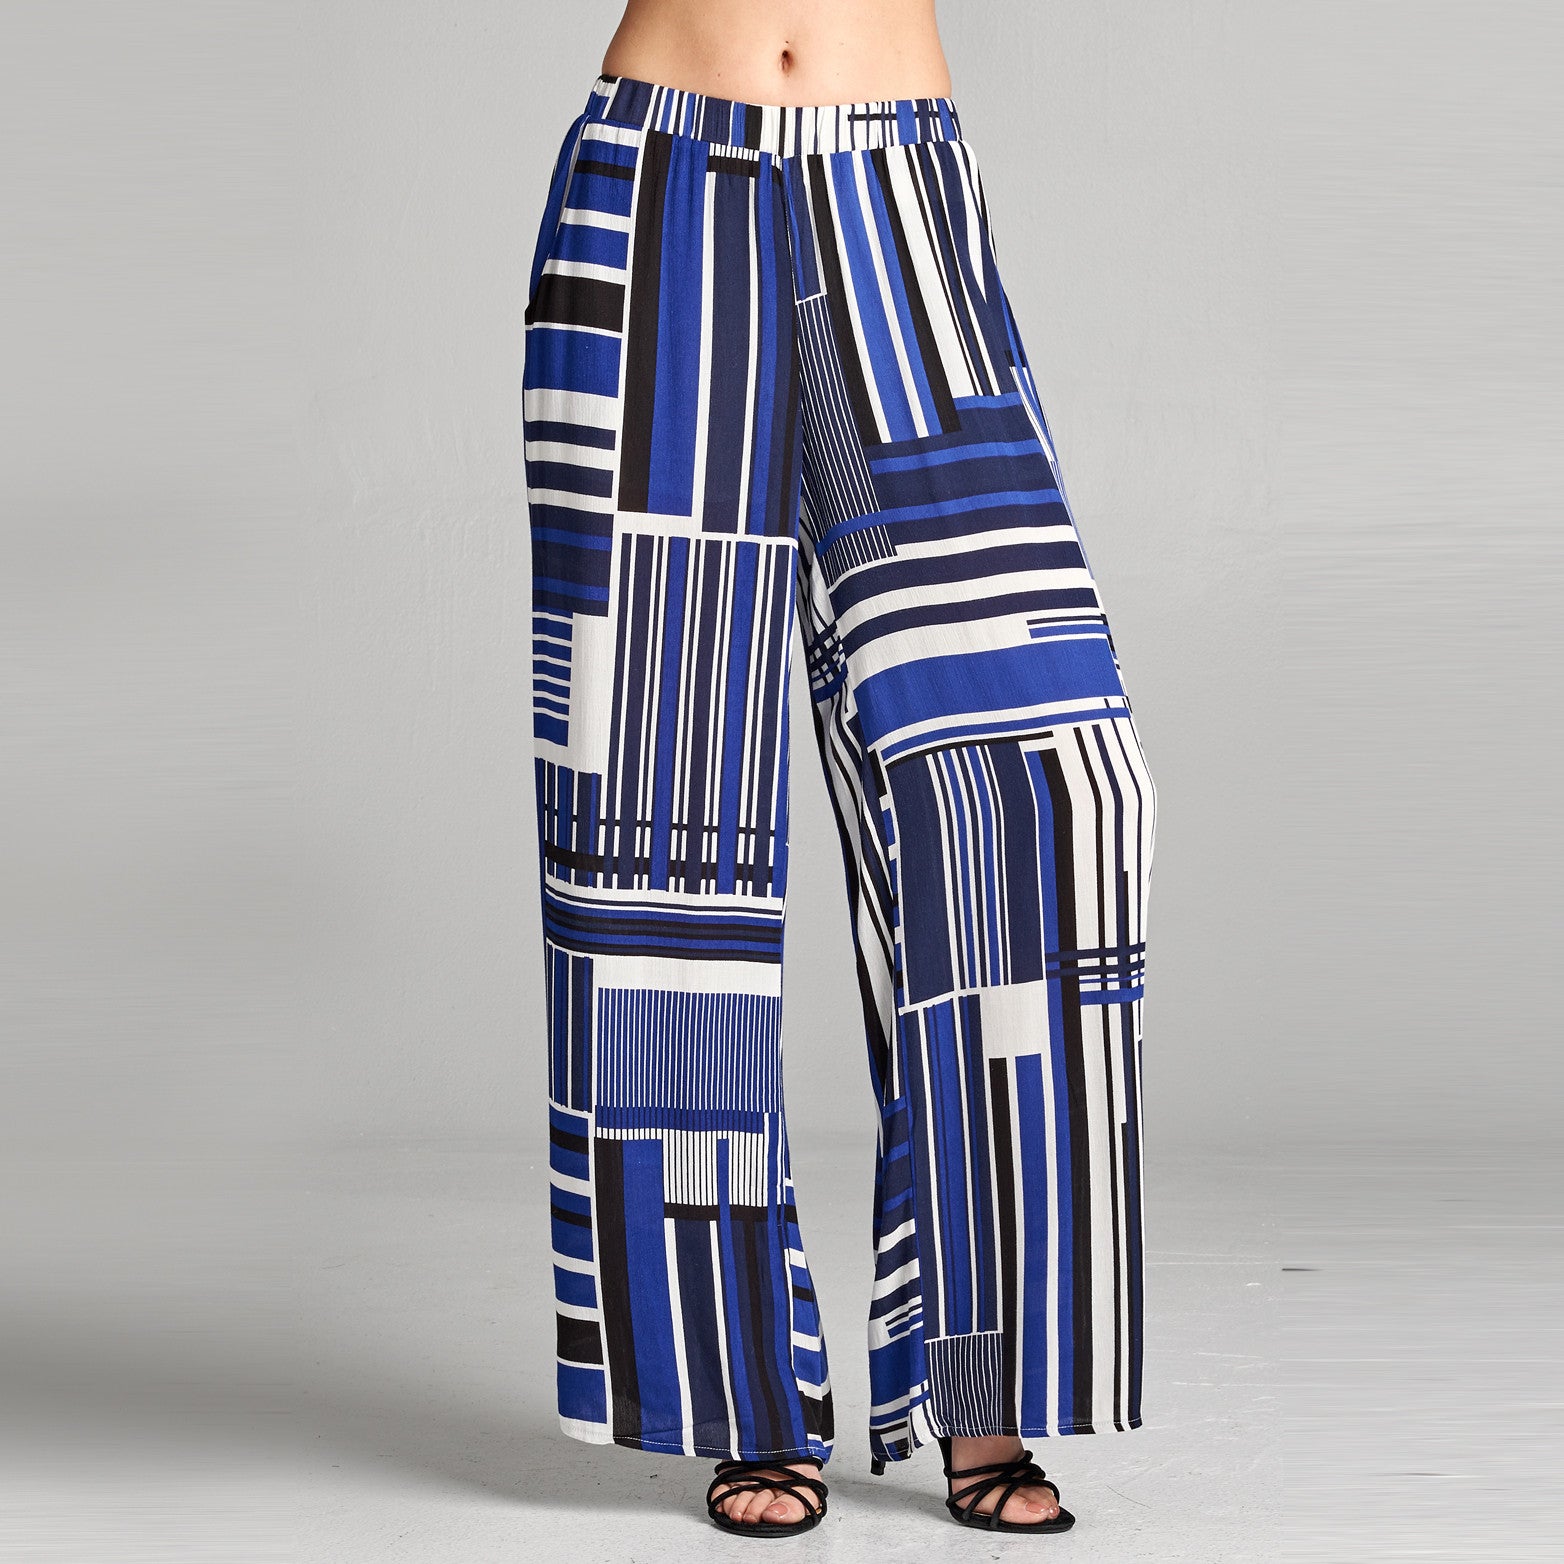 Abstract Stripe Wide Leg Pants | Pants | Abstract Striped Palazzo Pants, baby blue, blue, bottoms, culottes, green, lime, navy, oversize, palazzo, pants, spring, summer, Summer2019, transition, wide leg, yellow | Love, Kuza